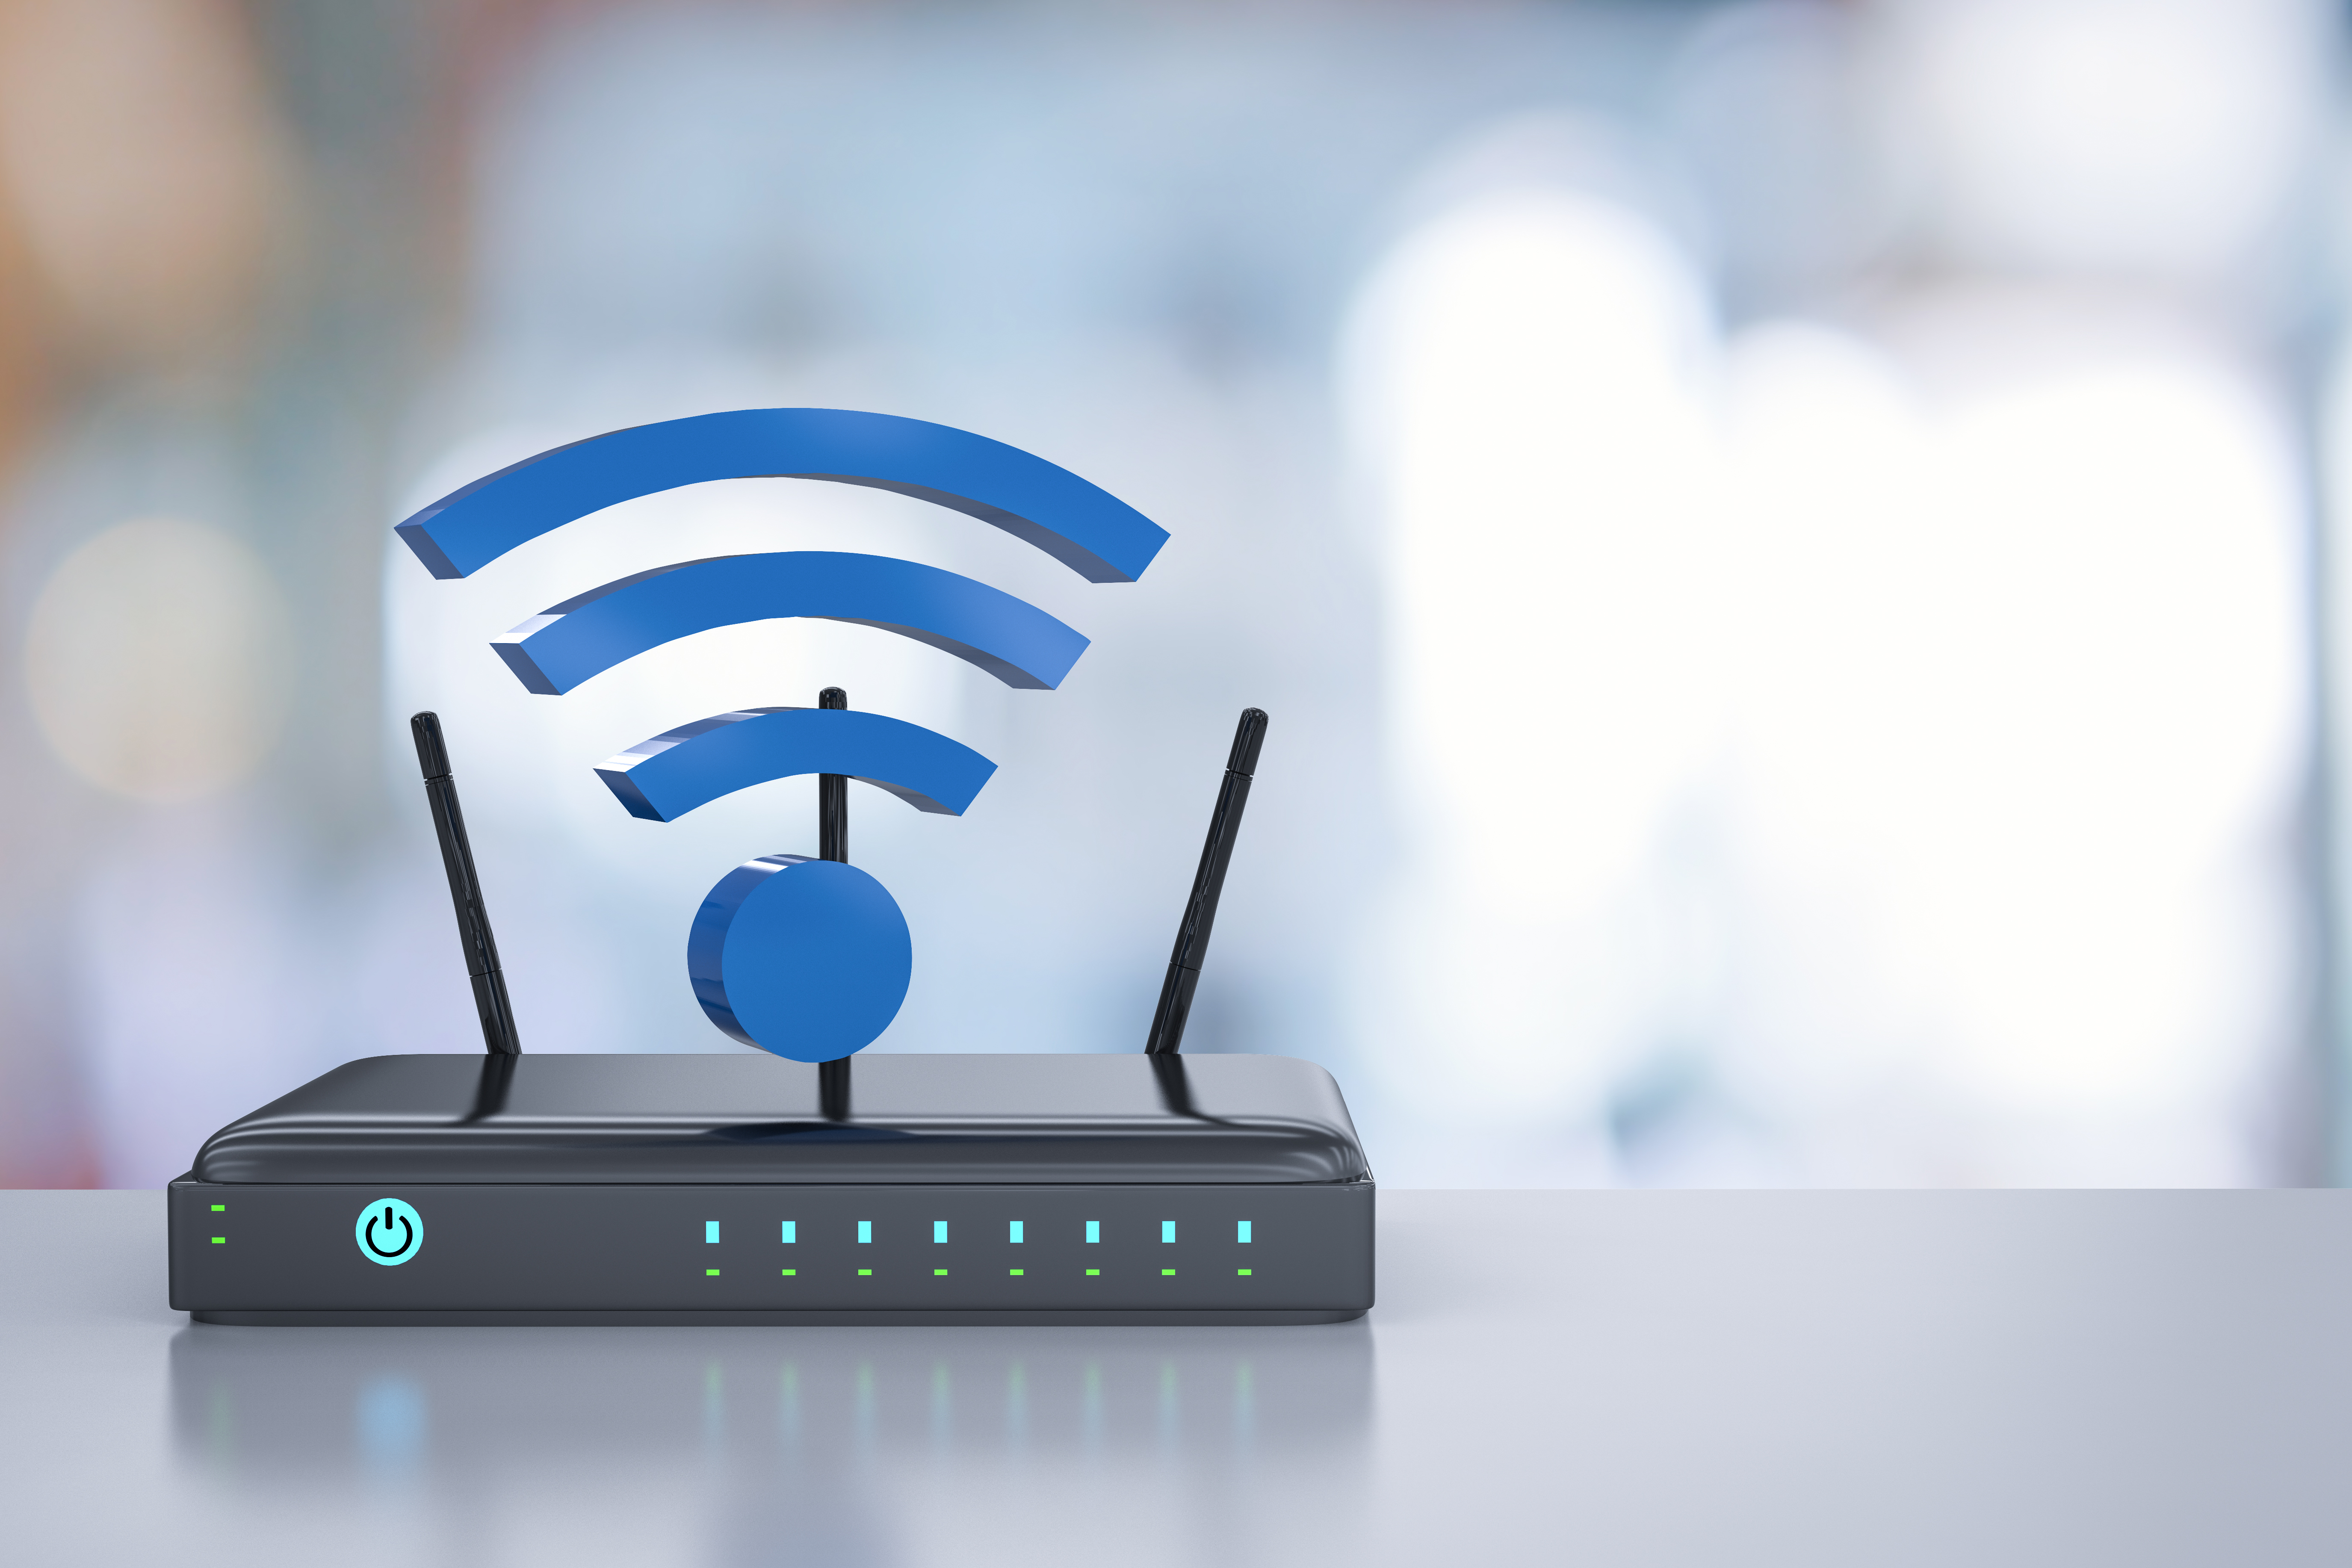 Experts have revealed seven major signs that could mean your Wi-Fi has been hacked